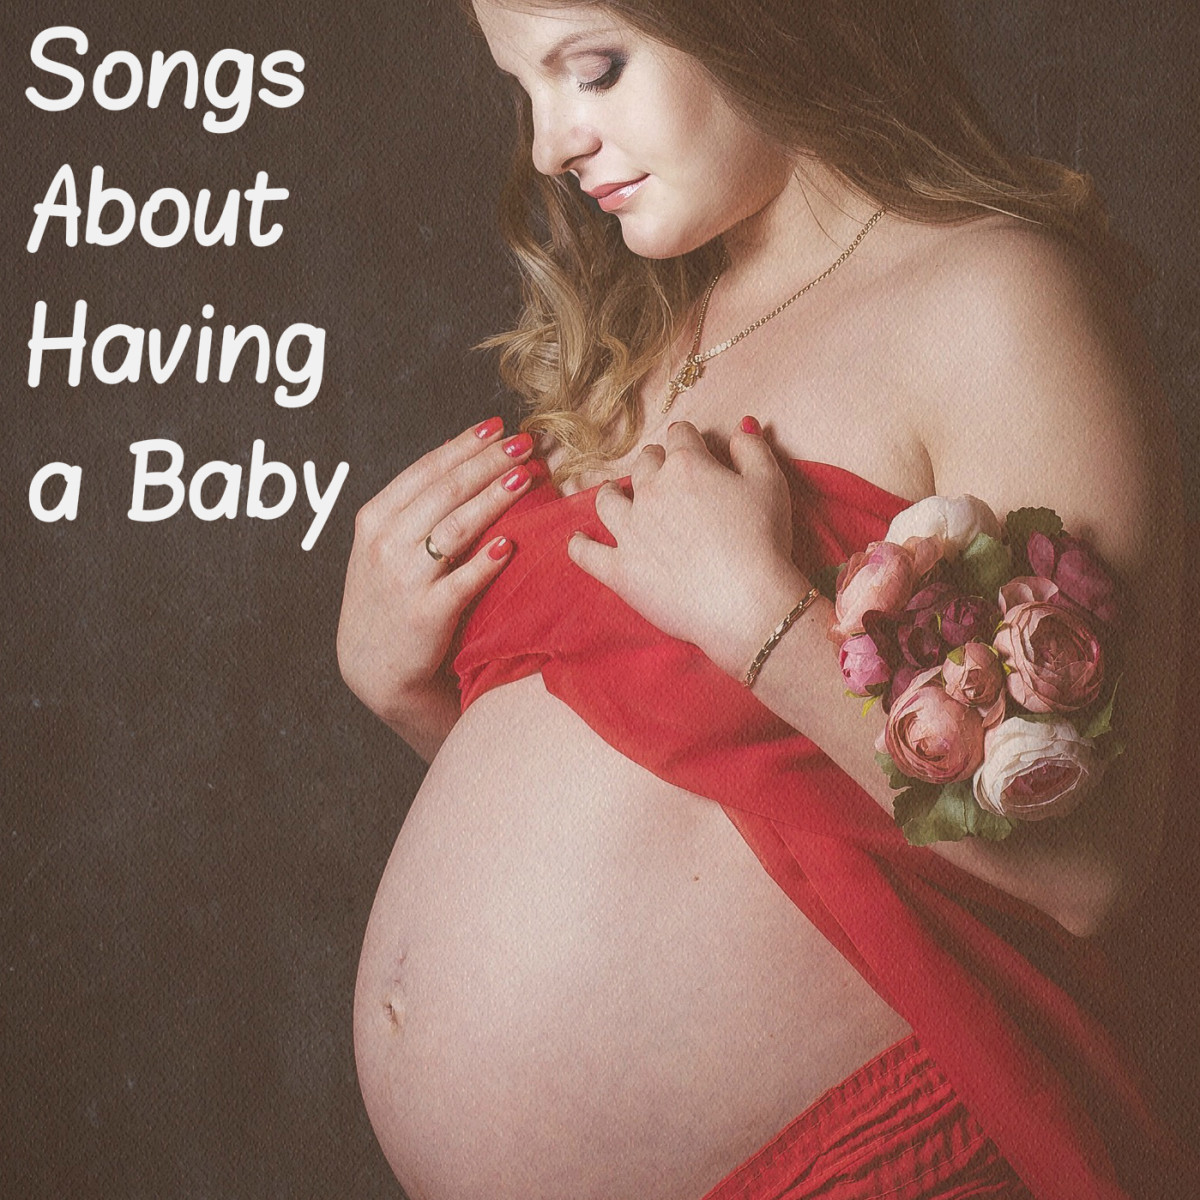 Having a baby changes everything in your life.  If you're a pregnant mother-to-be or the partner or friend of one, make a playlist of pop, rock, country, and R&B songs to celebrate the miracle of birth, babies, and the awesome job of parenthood.  